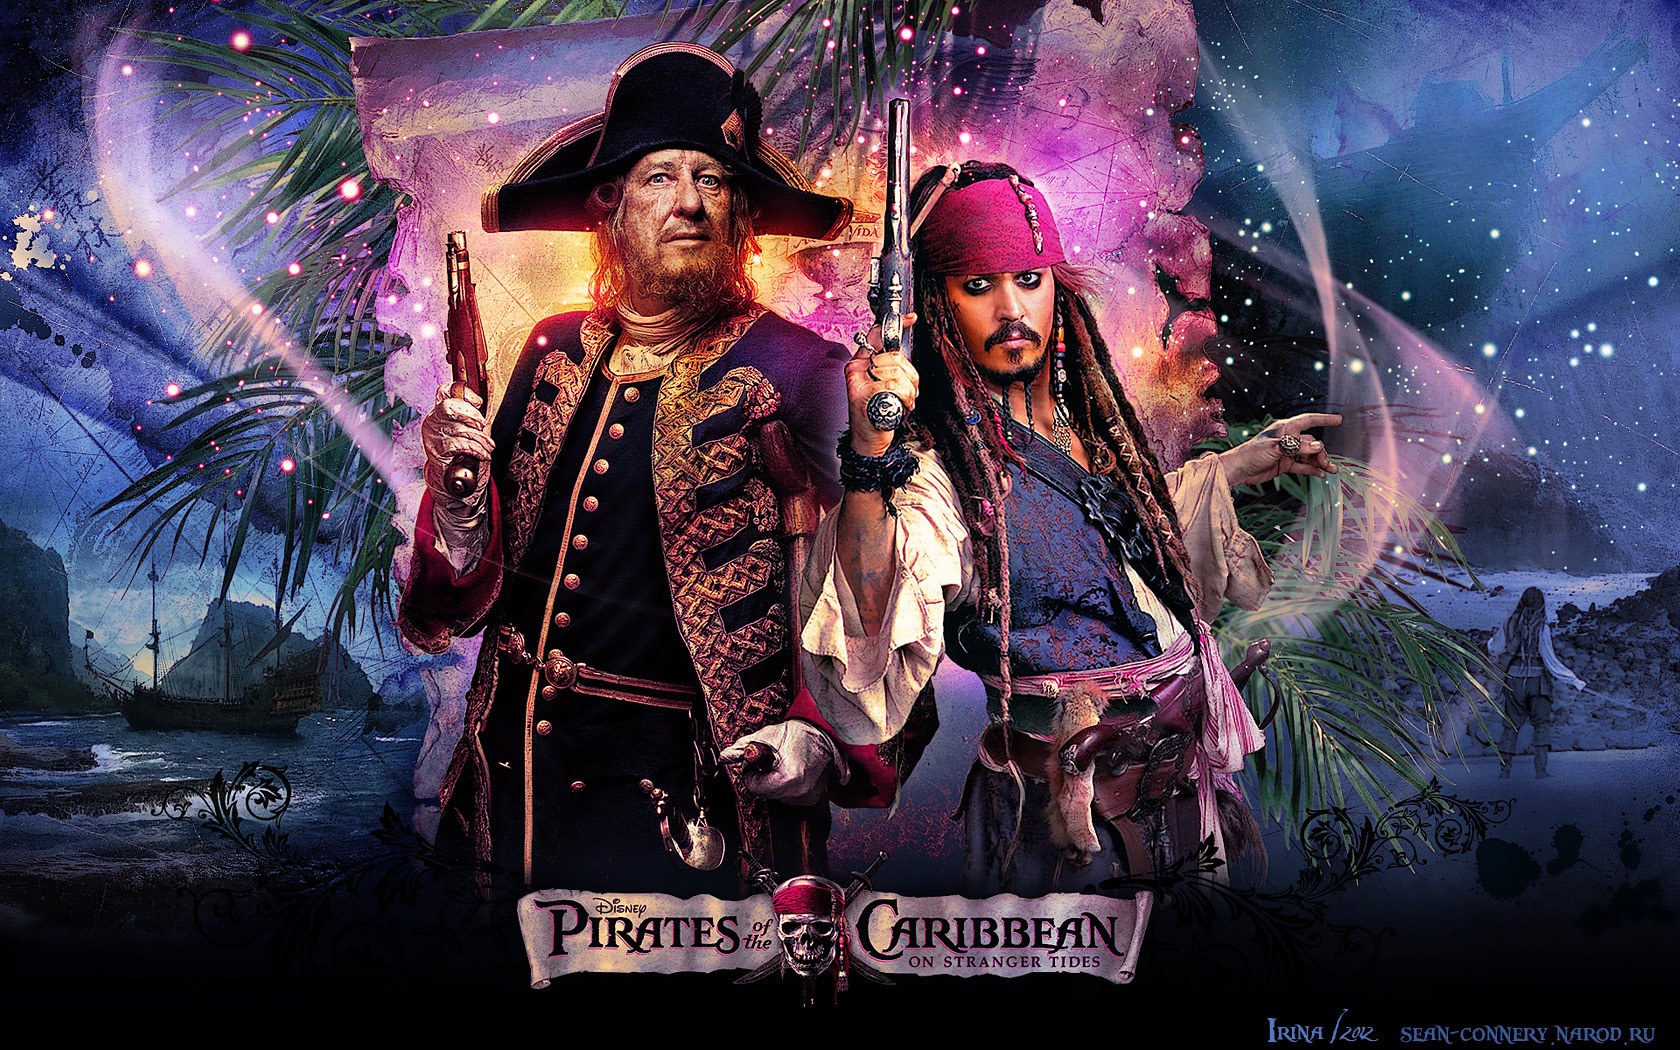 Джонни Депп the Pirates of the Caribbean poster